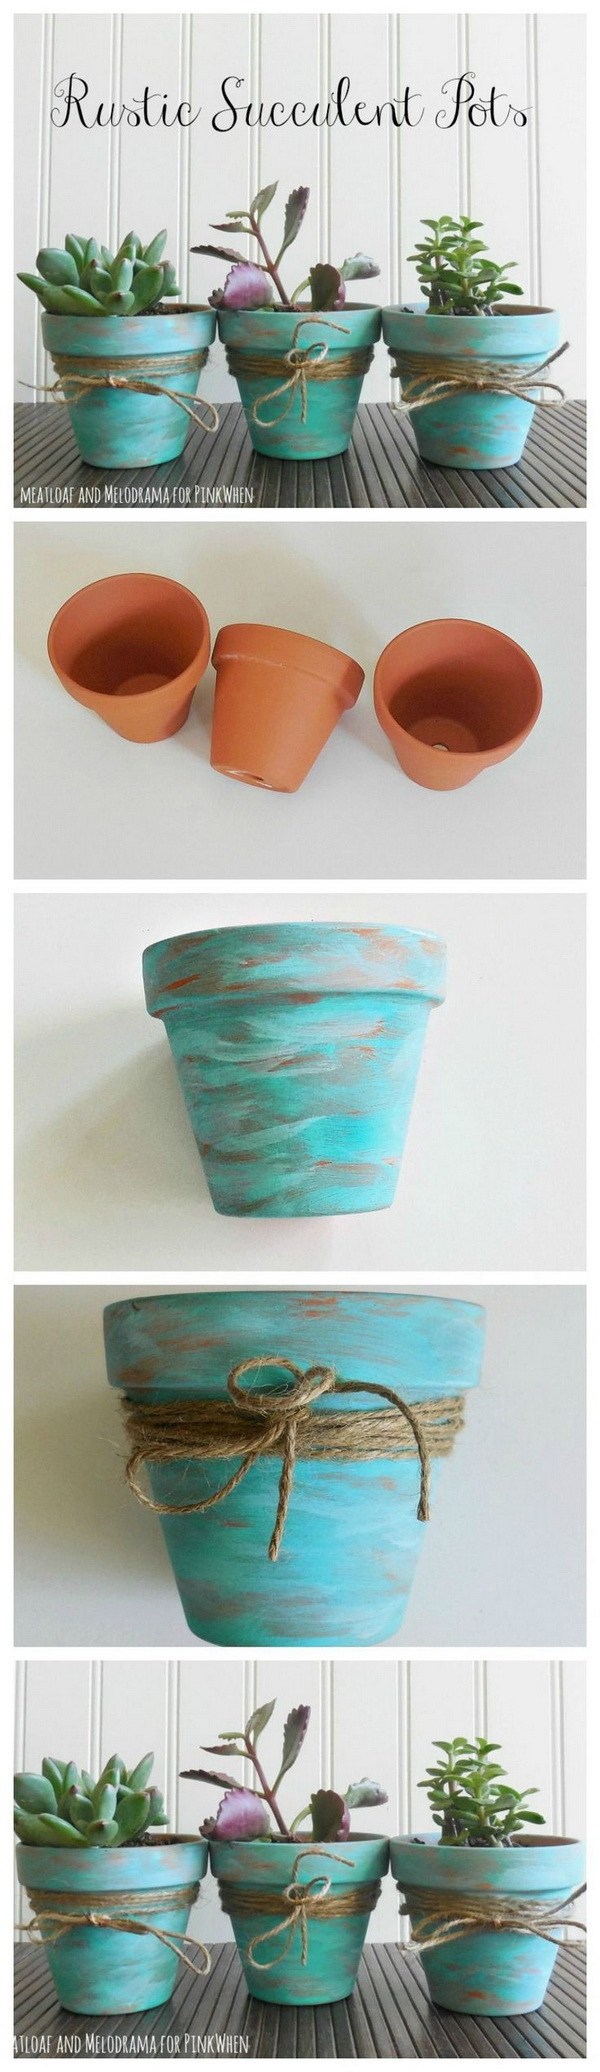 DIY Rustic Succulent Pots: The perfect addition to any table inside or out. 